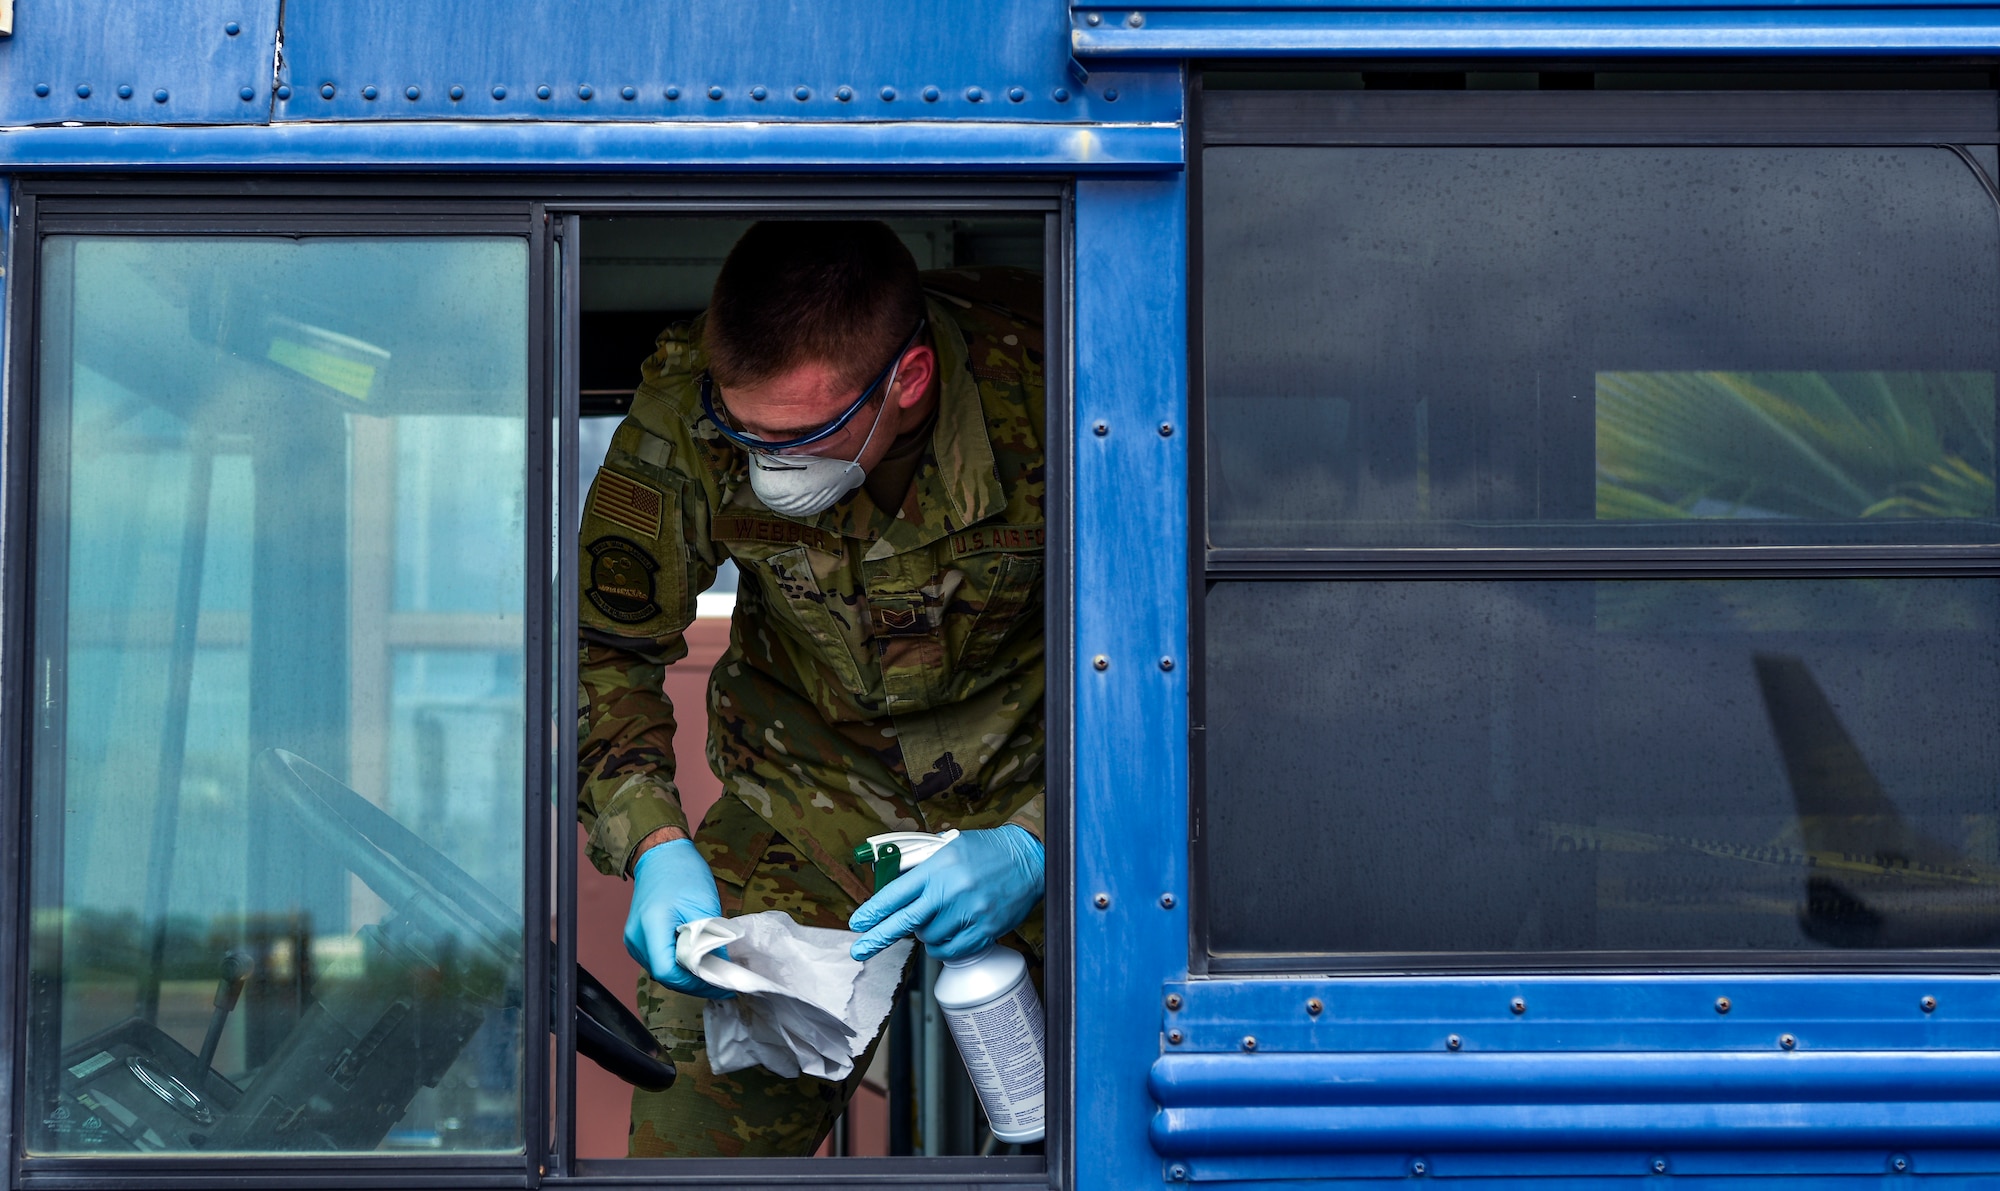 U.S. Air Force Staff Sgt. Colton Webber, 735th Air Mobility Squadron passenger terminal shift supervisor,  decontaminates the driver's seat after transporting passengers to and from the aircraft at Joint Base Pearl Harbor-Hickam, Hawaii, March 25, 2020.

U.S. Indo-Pacific Command (INDOPACOM) directed implementation of Health Protection Condition (HPCON) Charlie March 24, 2020.

(U.S. Air Force photo by Tech. Sgt. Anthony Nelson Jr. )